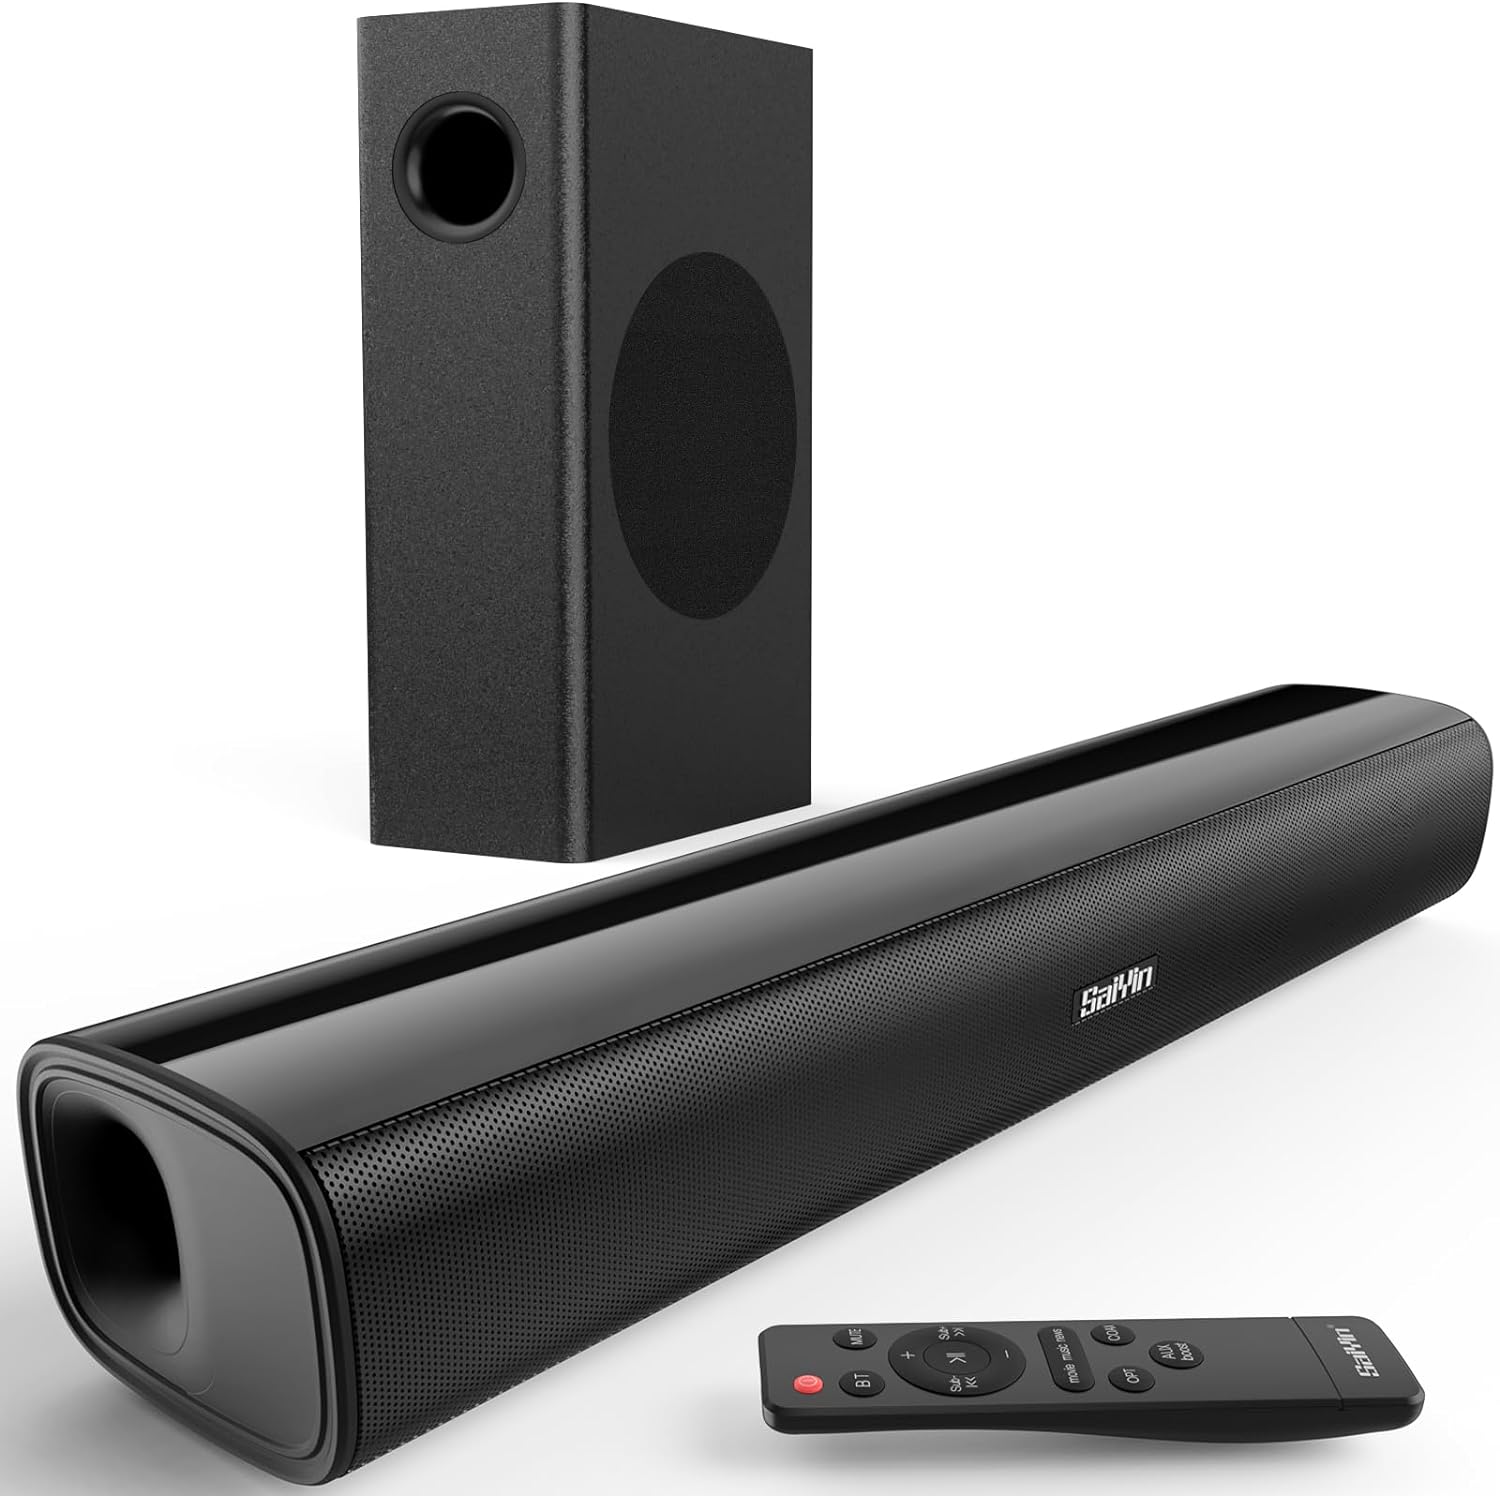 Saiyin Sound Bars with Subwoofer Review